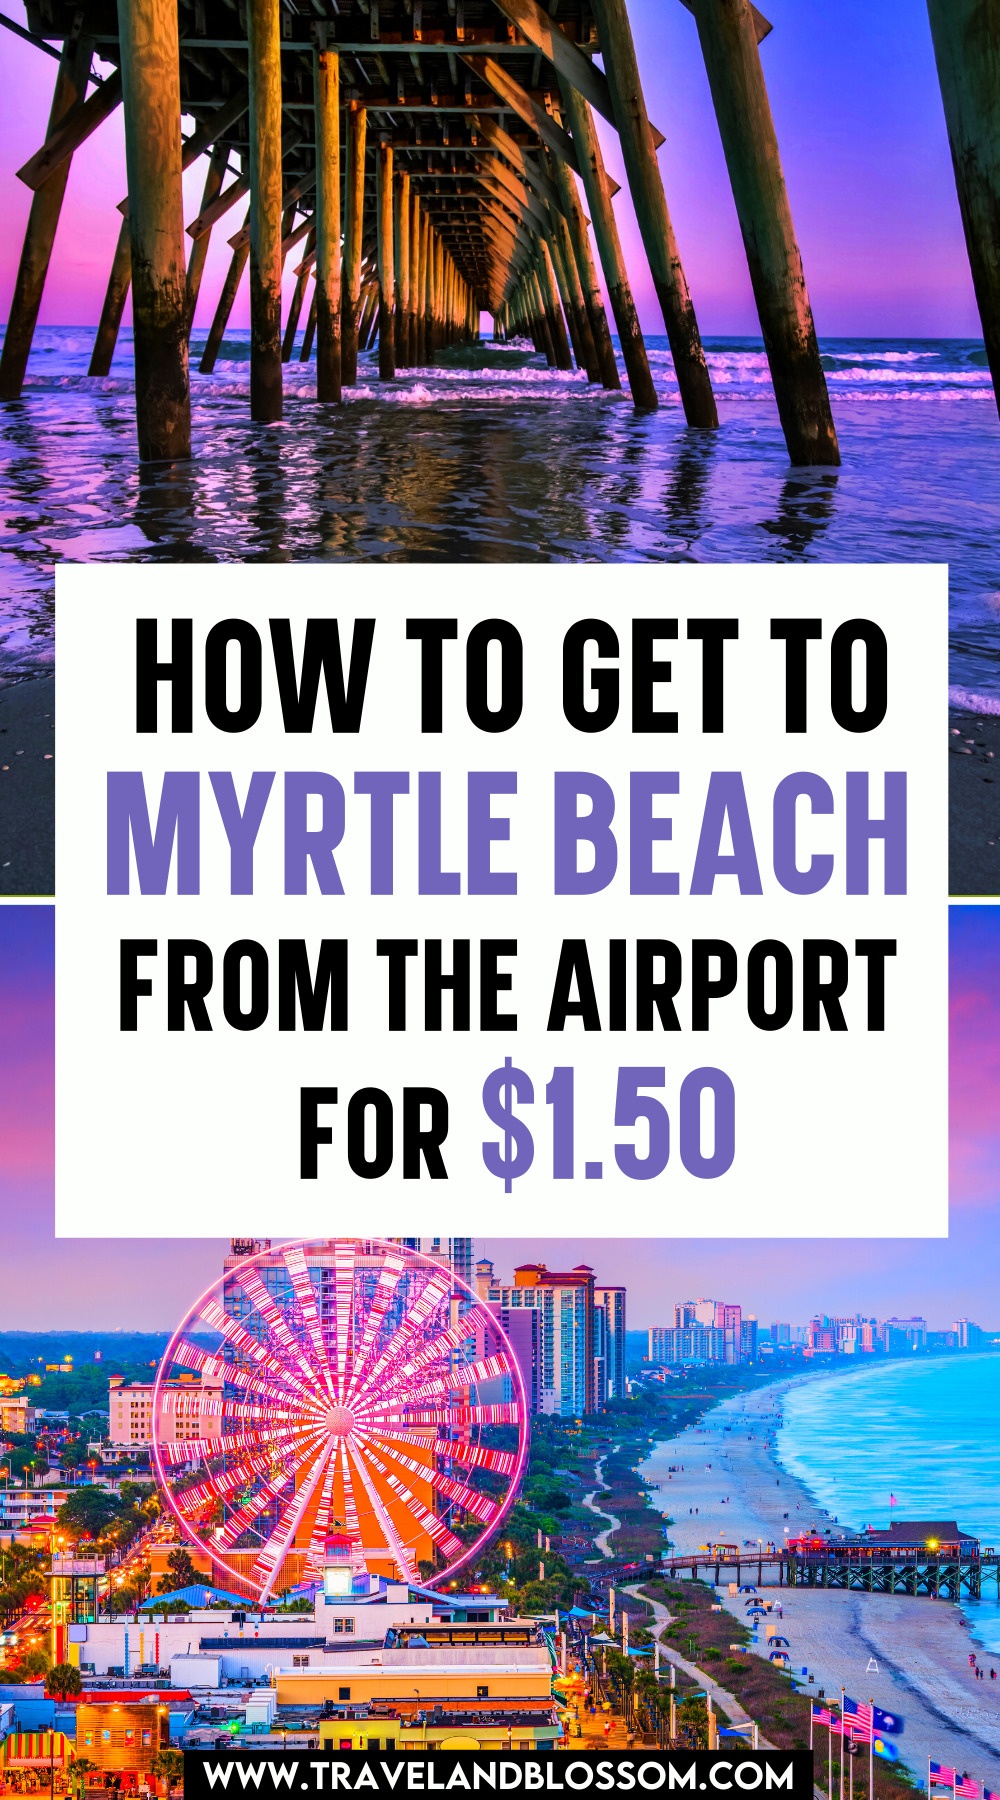 How To Get To Myrtle Beach From The Airport for $1.50